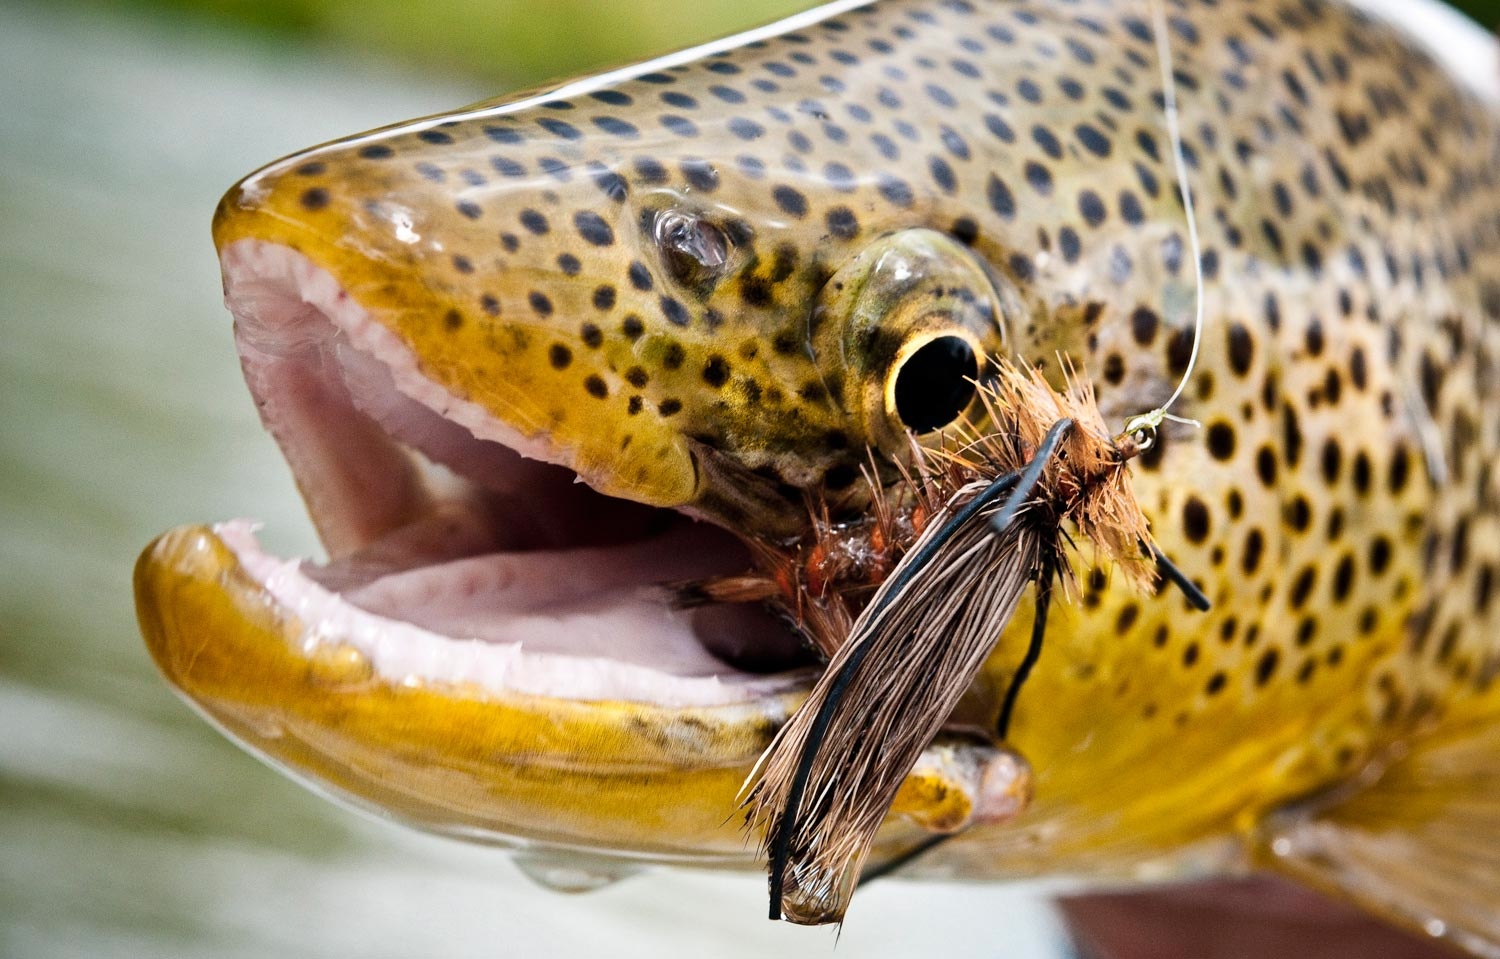 brown trout fishing - Fly Fishing, Gink and Gasoline, How to Fly Fish, Trout Fishing, Fly Tying